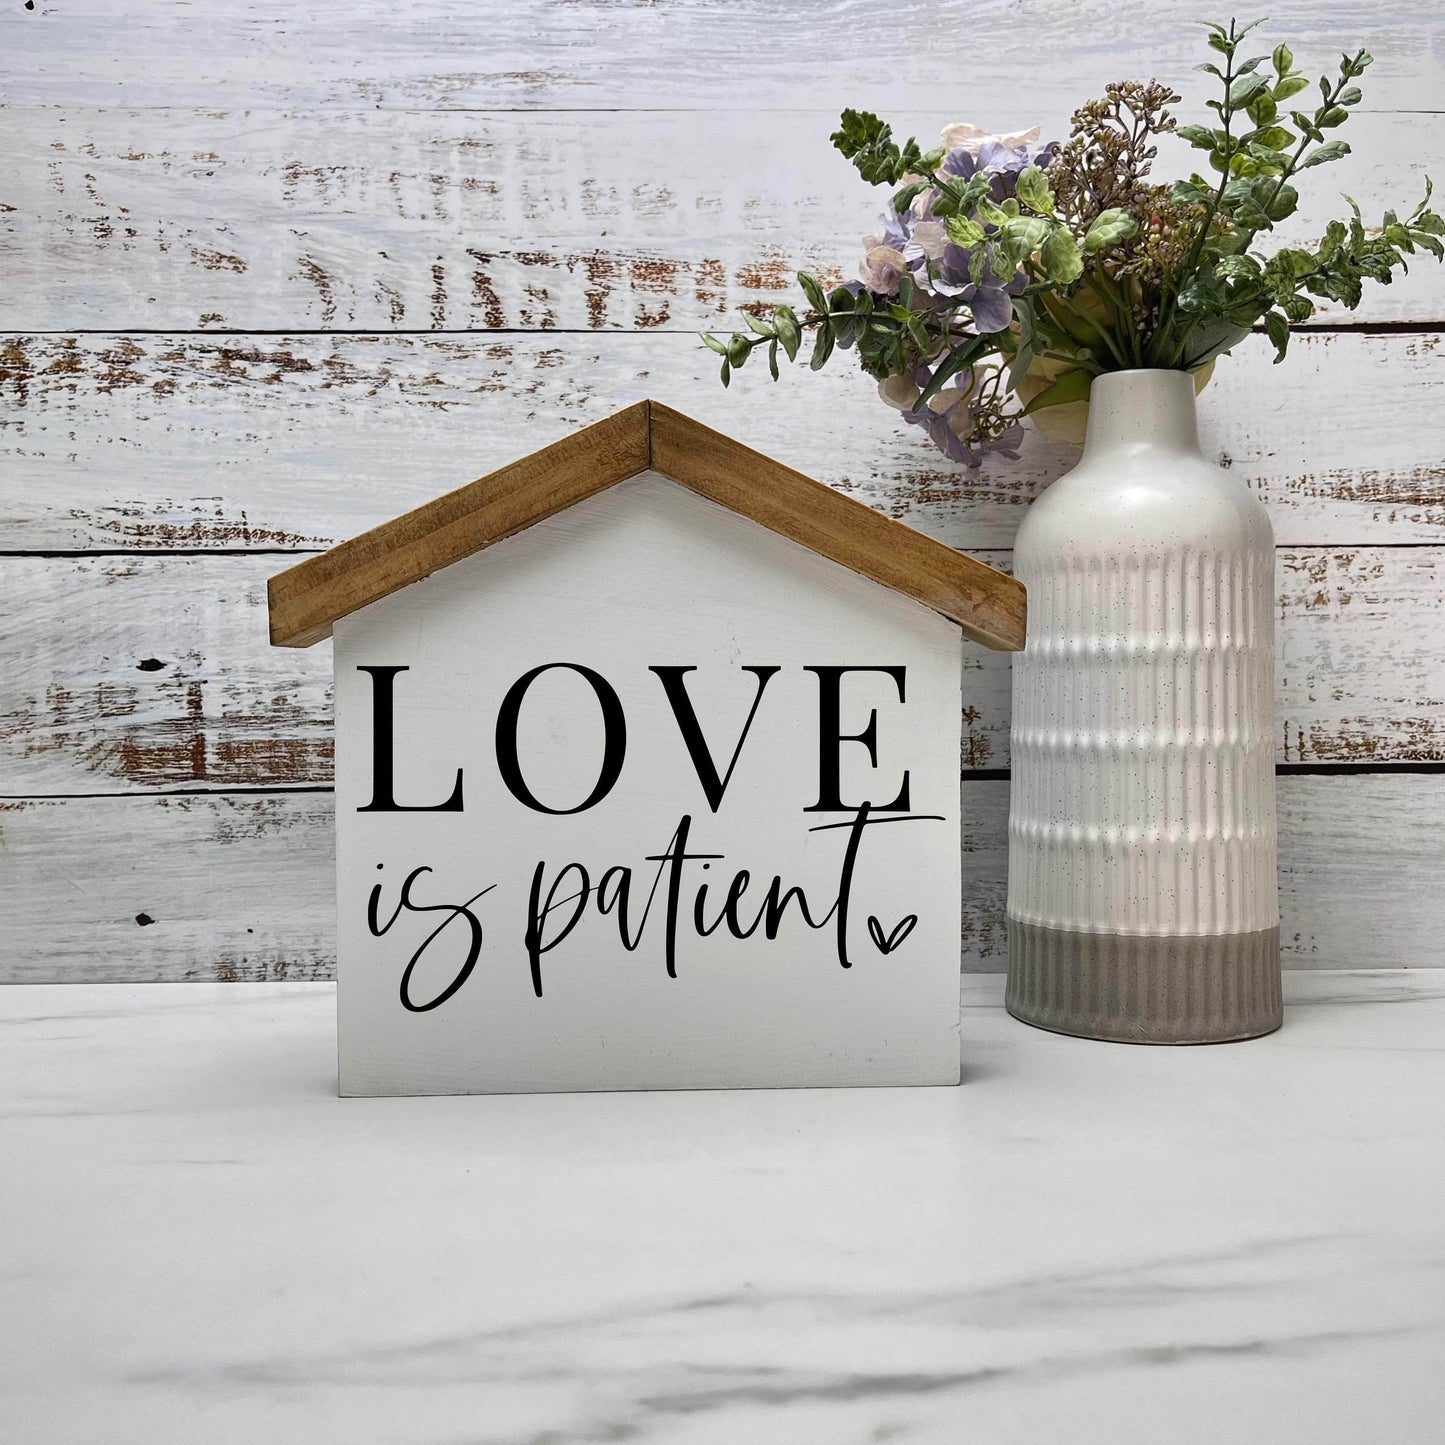 Love is patient House wood sign, love sign, couples gift sign, quote sign, home decor